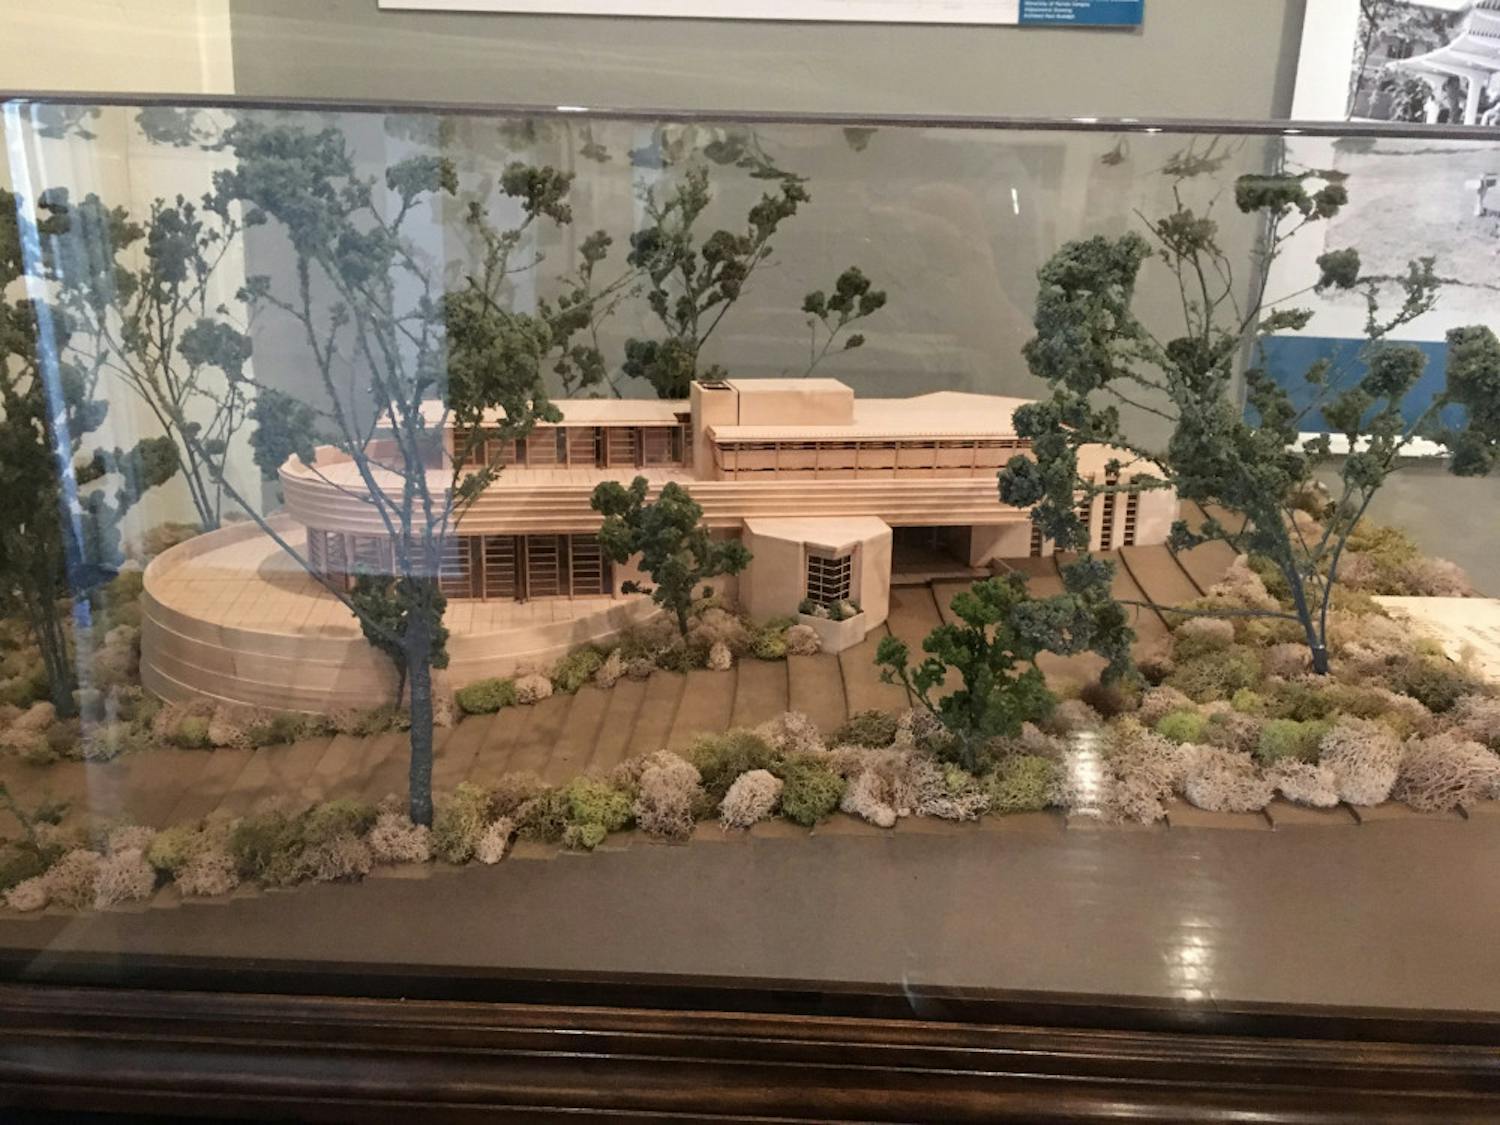 A model of the unbuilt Zeta Beta Tau Fraternity House designed by Frank Lloyd Wright. The design for the house was drawn in 1954 and followed the mid-century style, but due in part to code issues, the house was never built. 